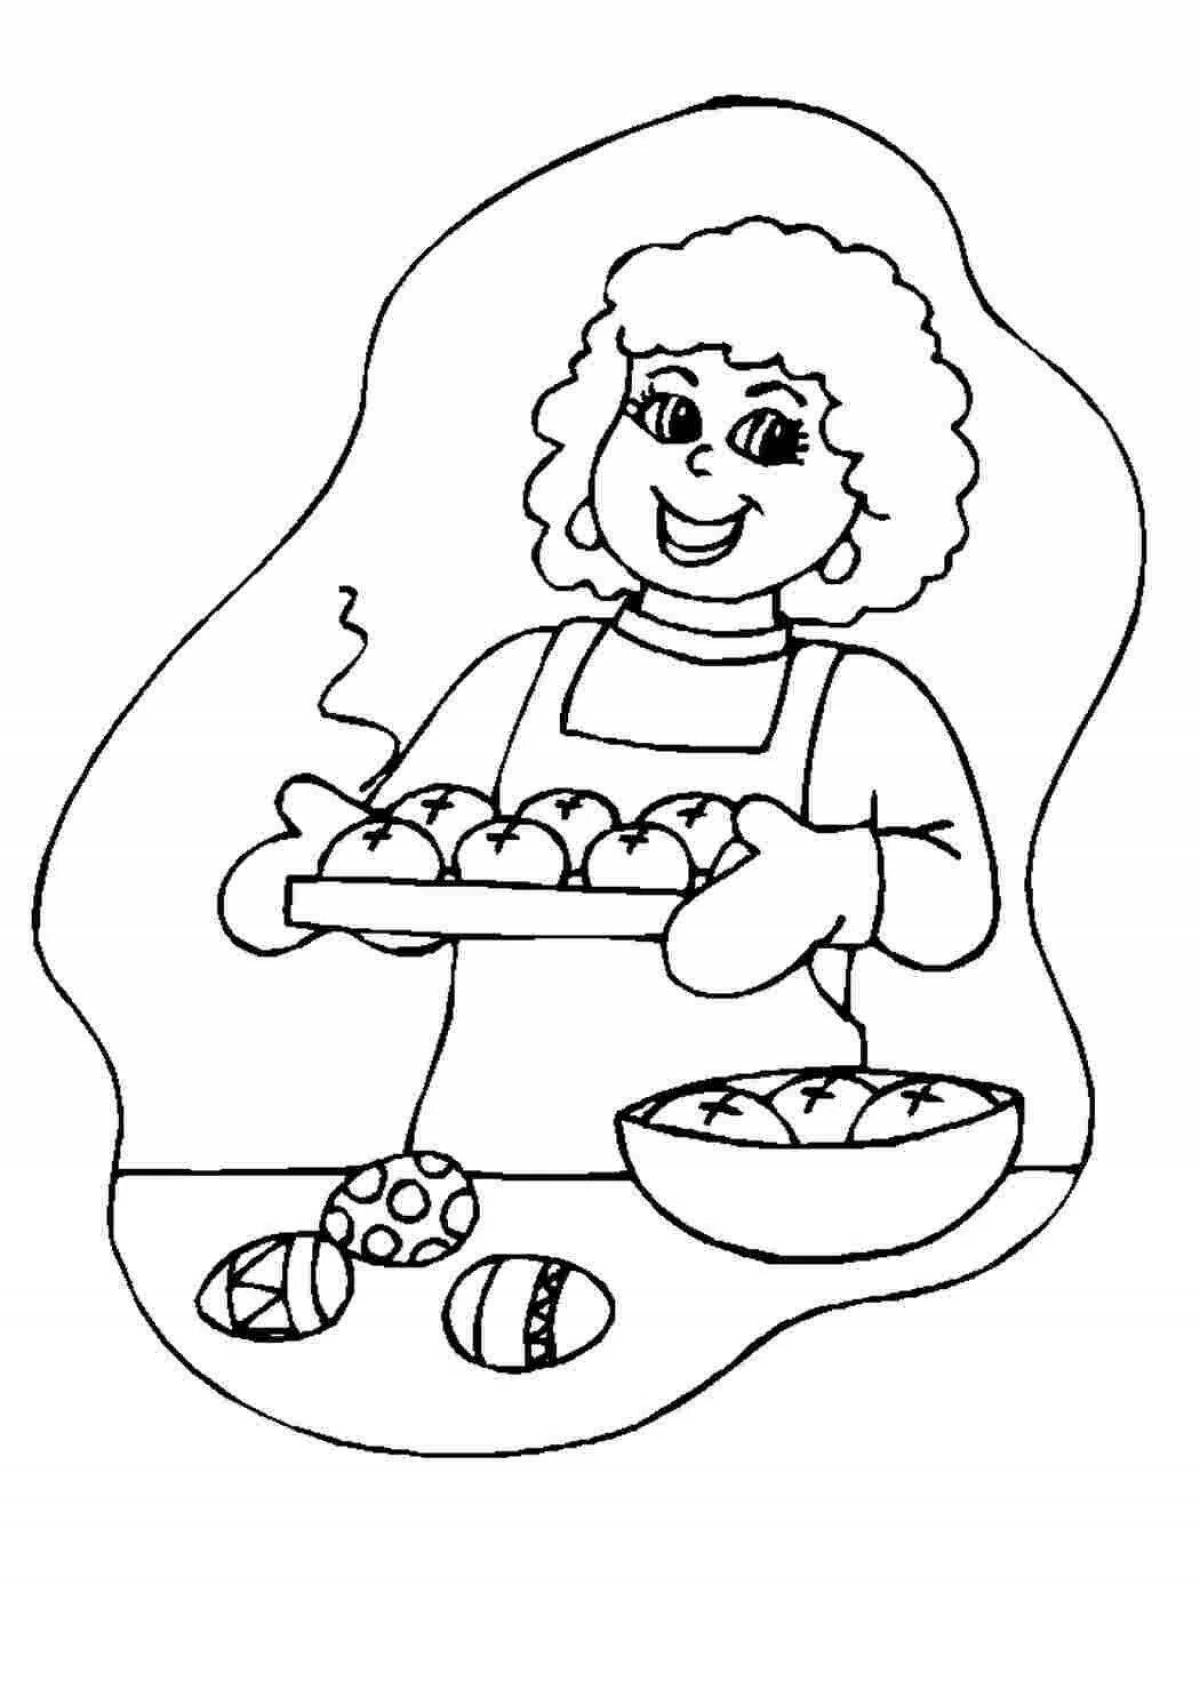 Coloring page energetic woman for kids